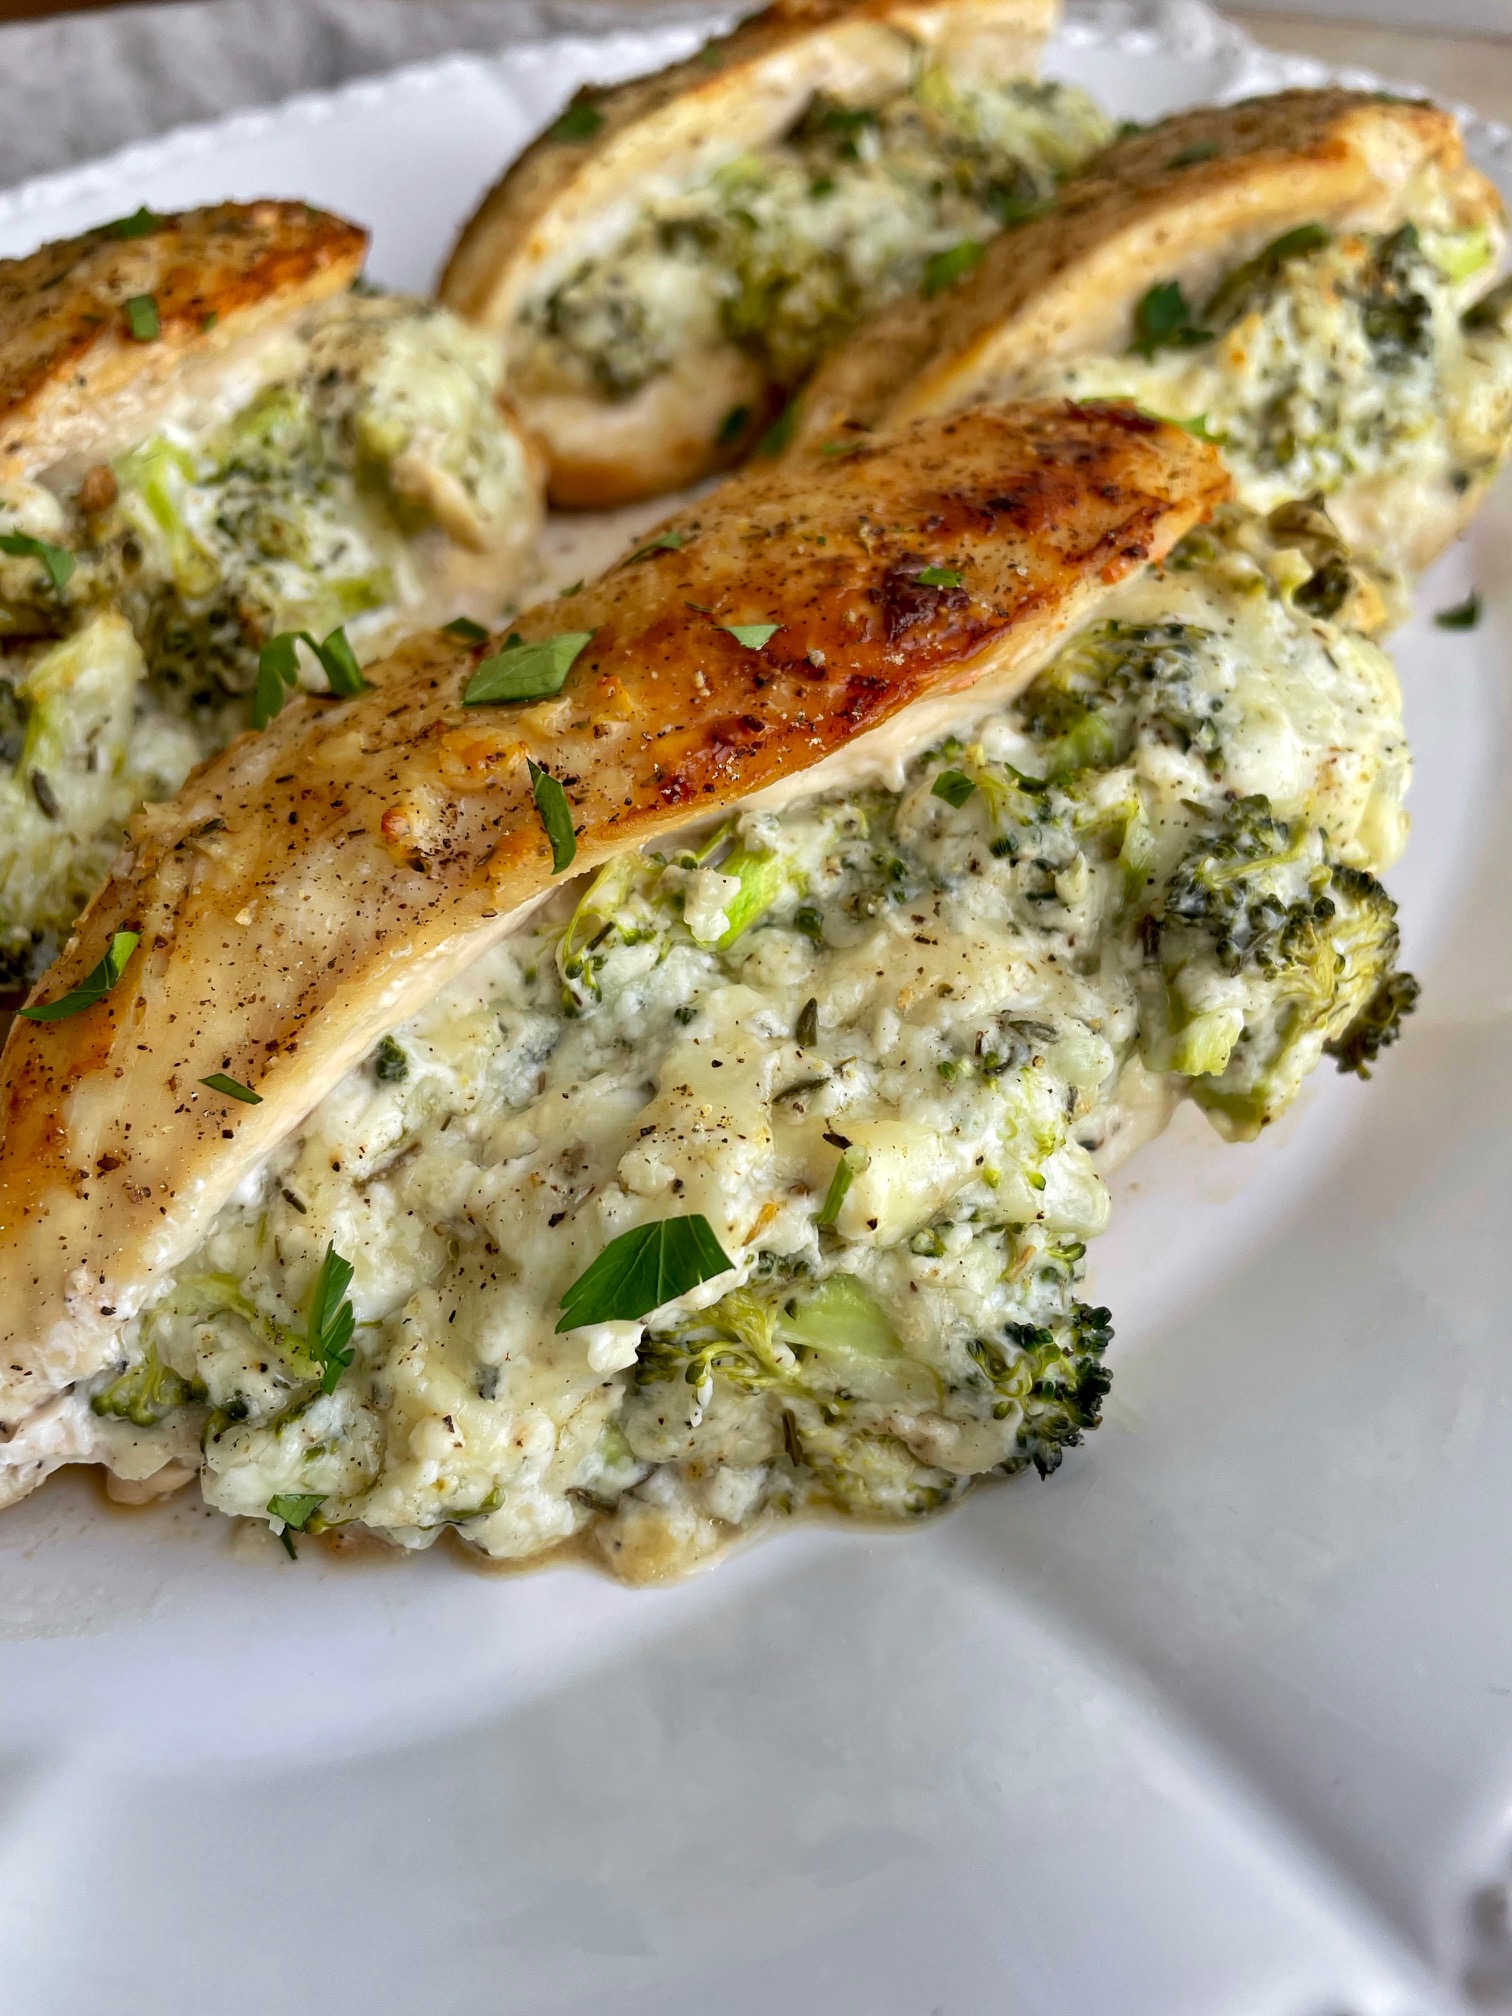 A close up of broccoli and cheese stuffed chicken breasts to show detail.